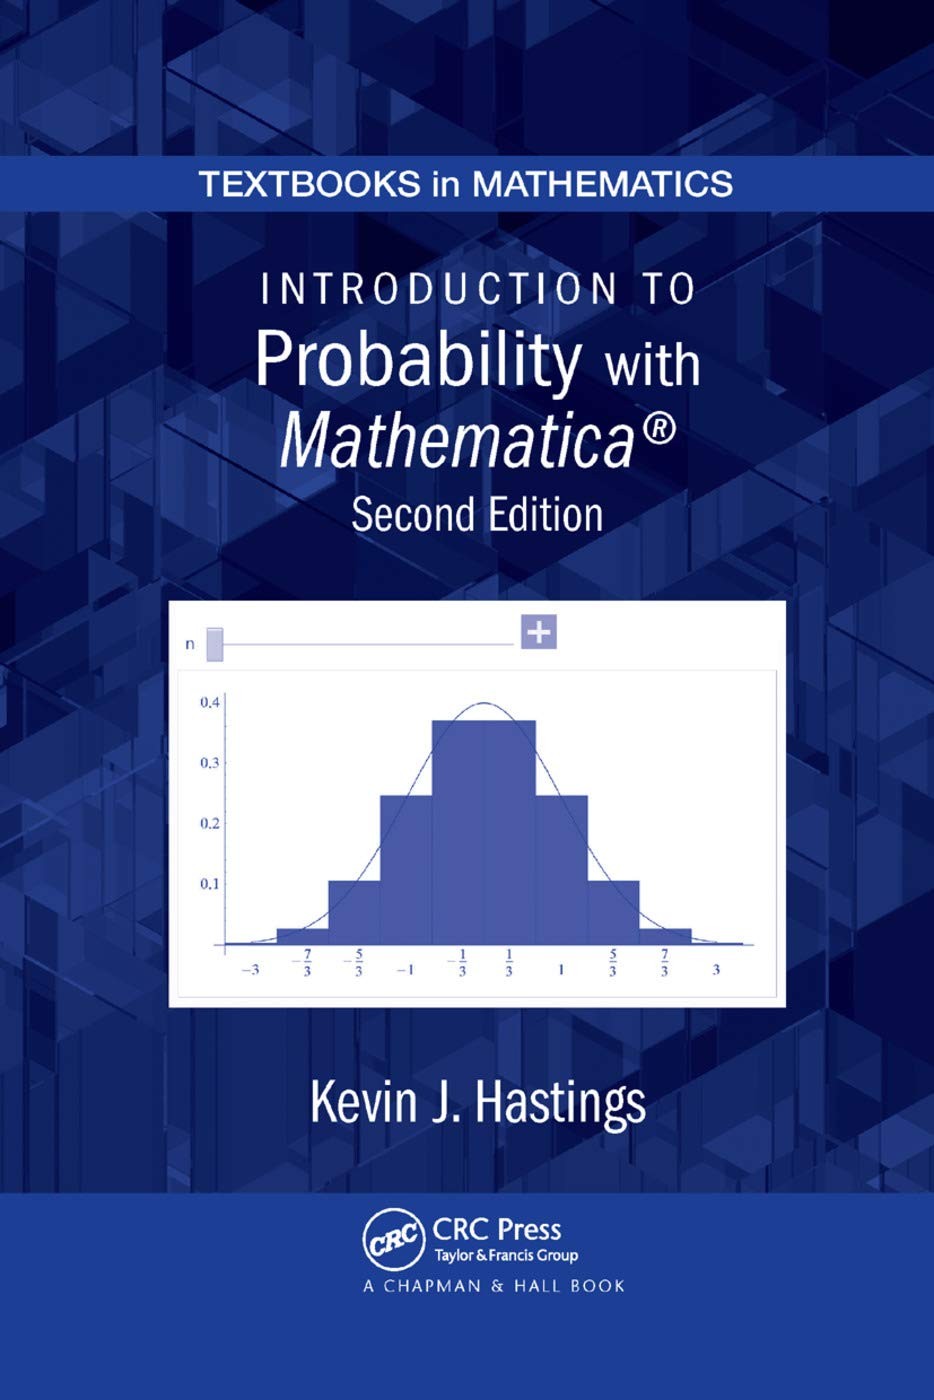 Introduction to Probability with Mathematica®, Second Edition